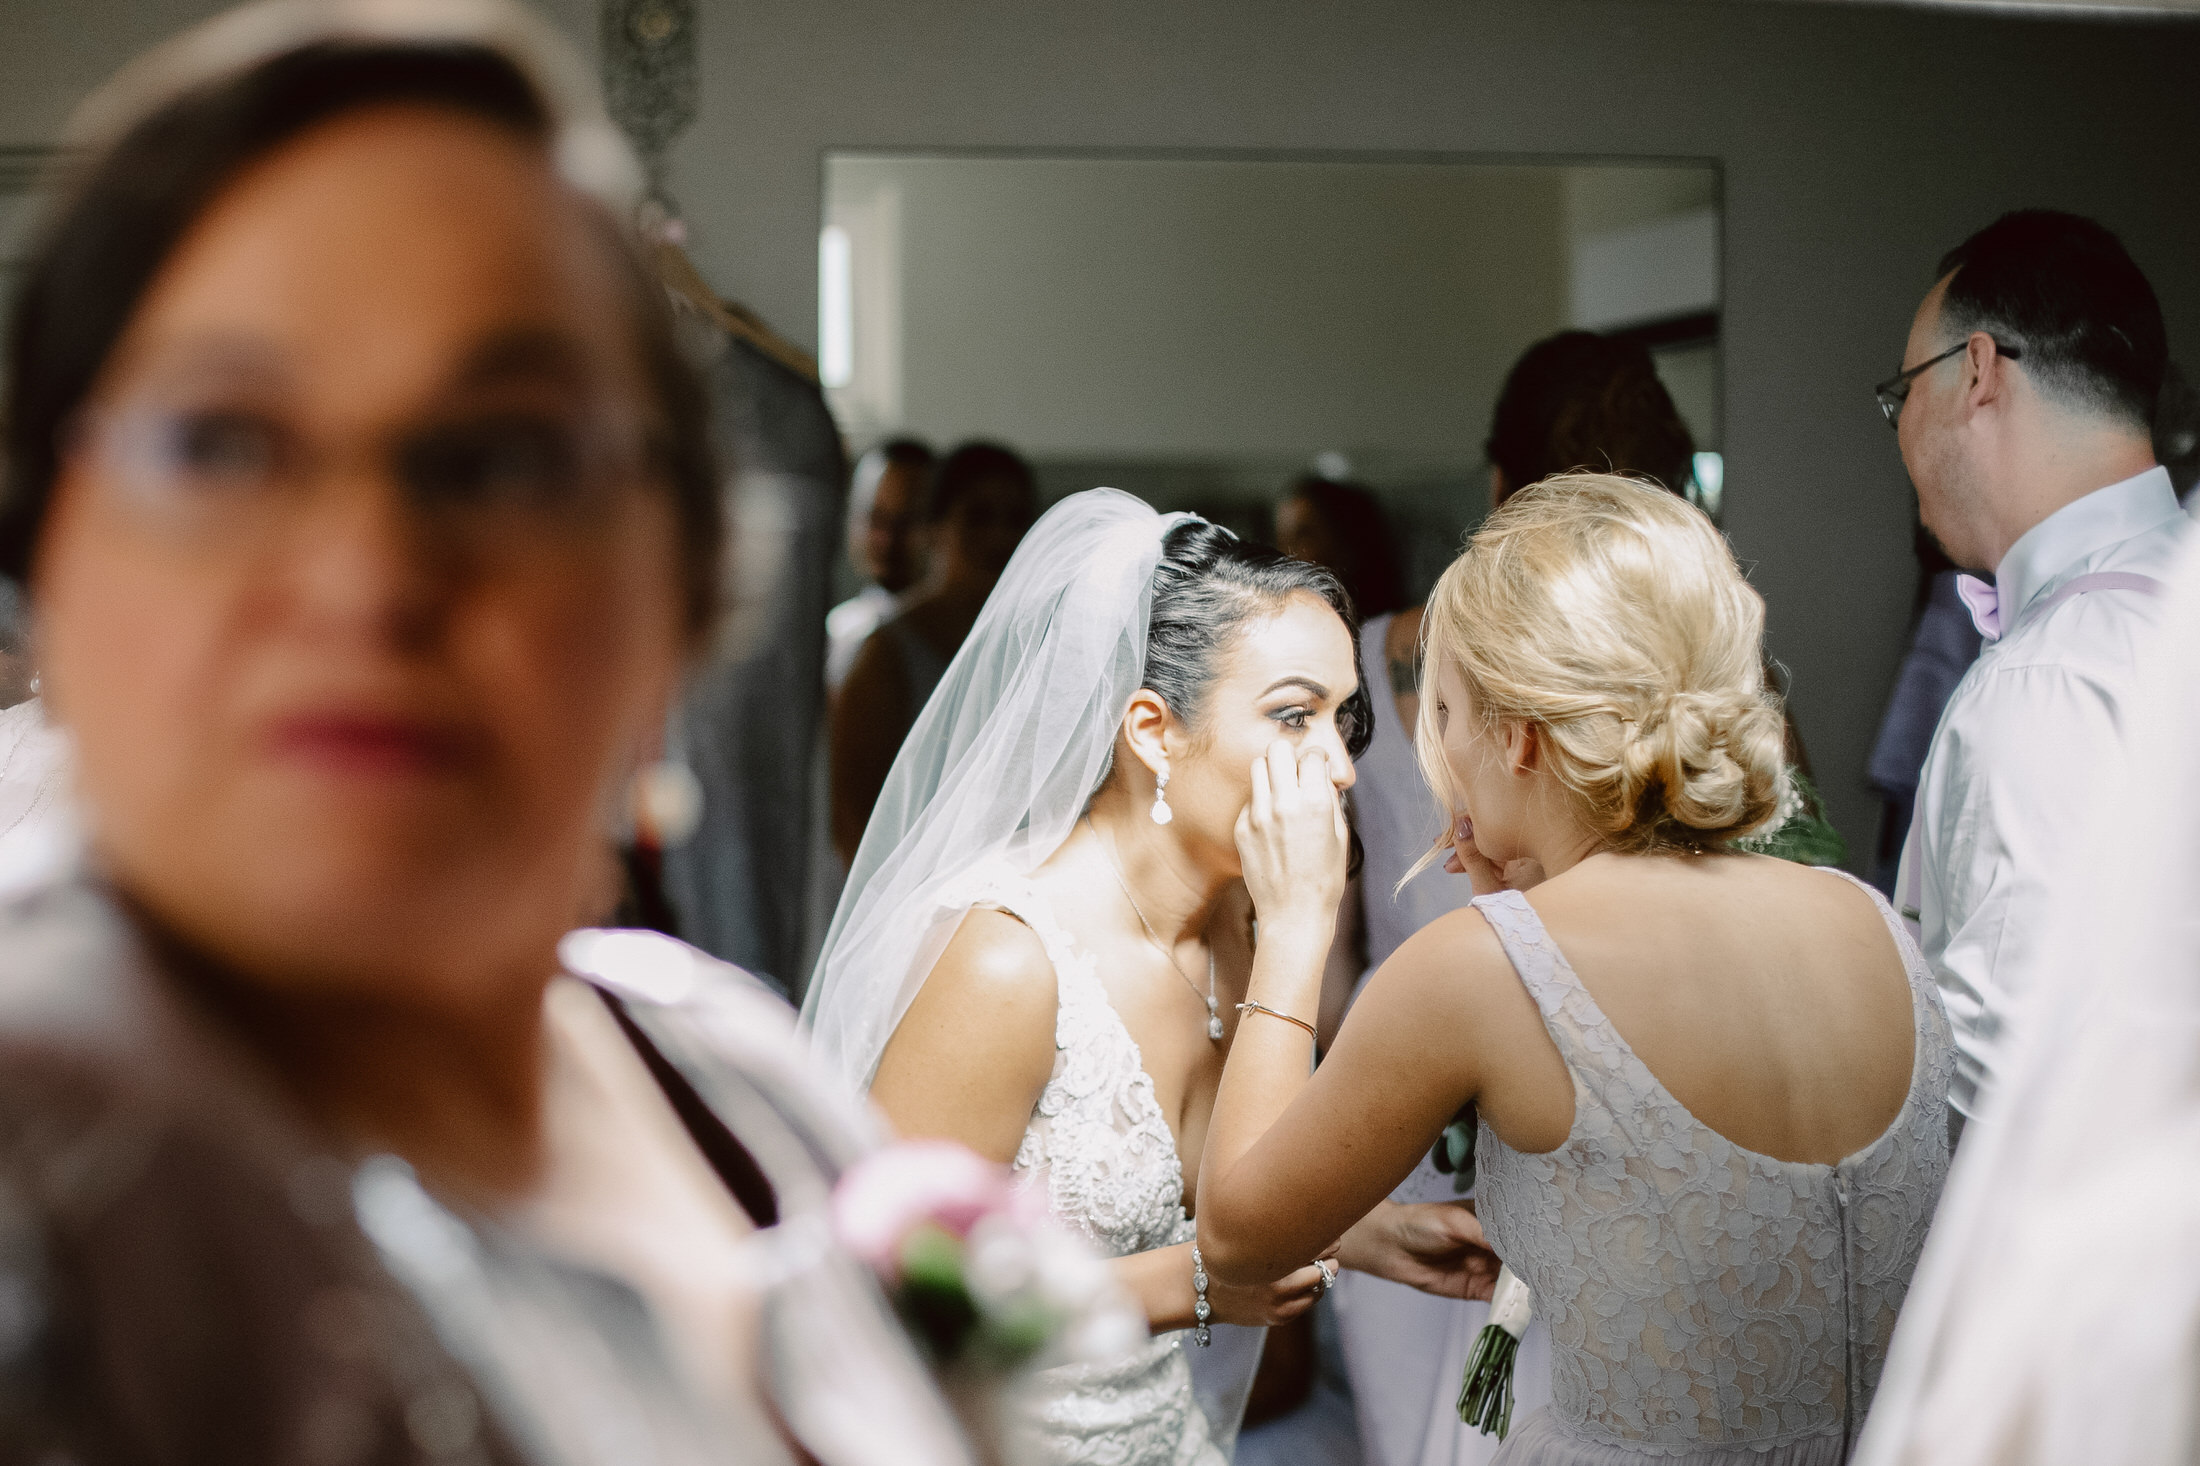 Bride getting ready for the ceremony.